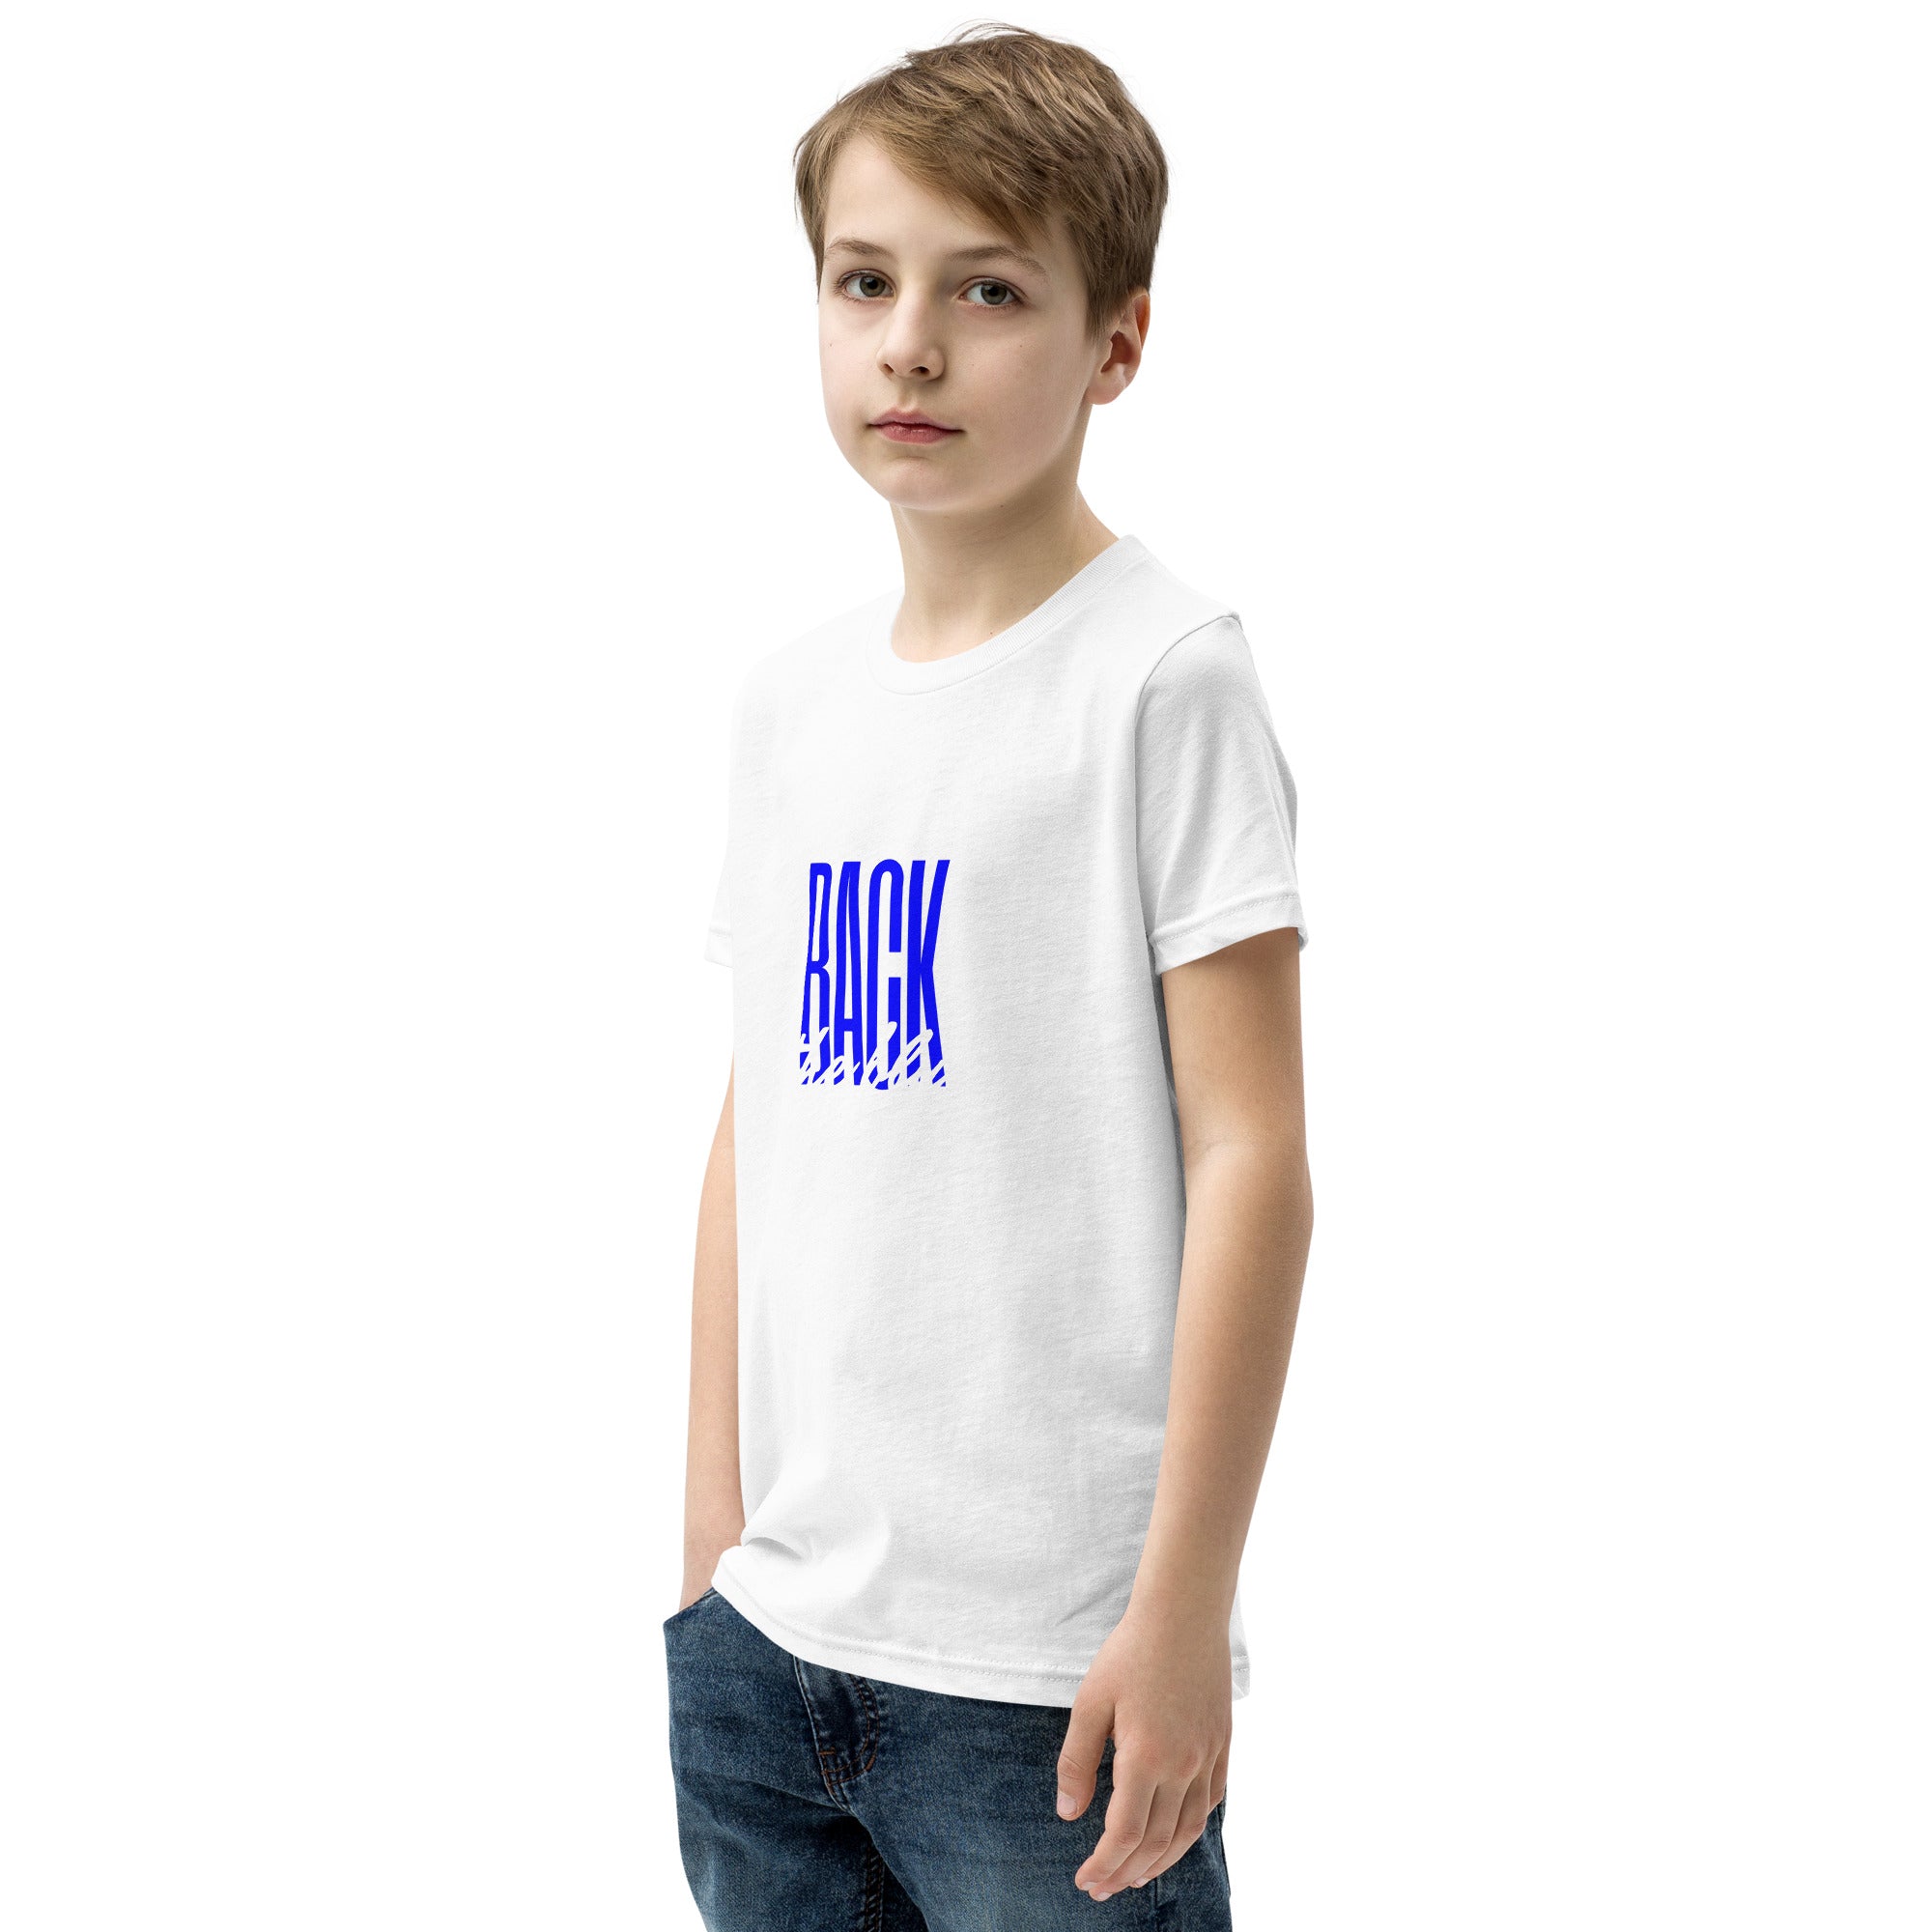 Back the Blue Youth Short Sleeve T-Shirt